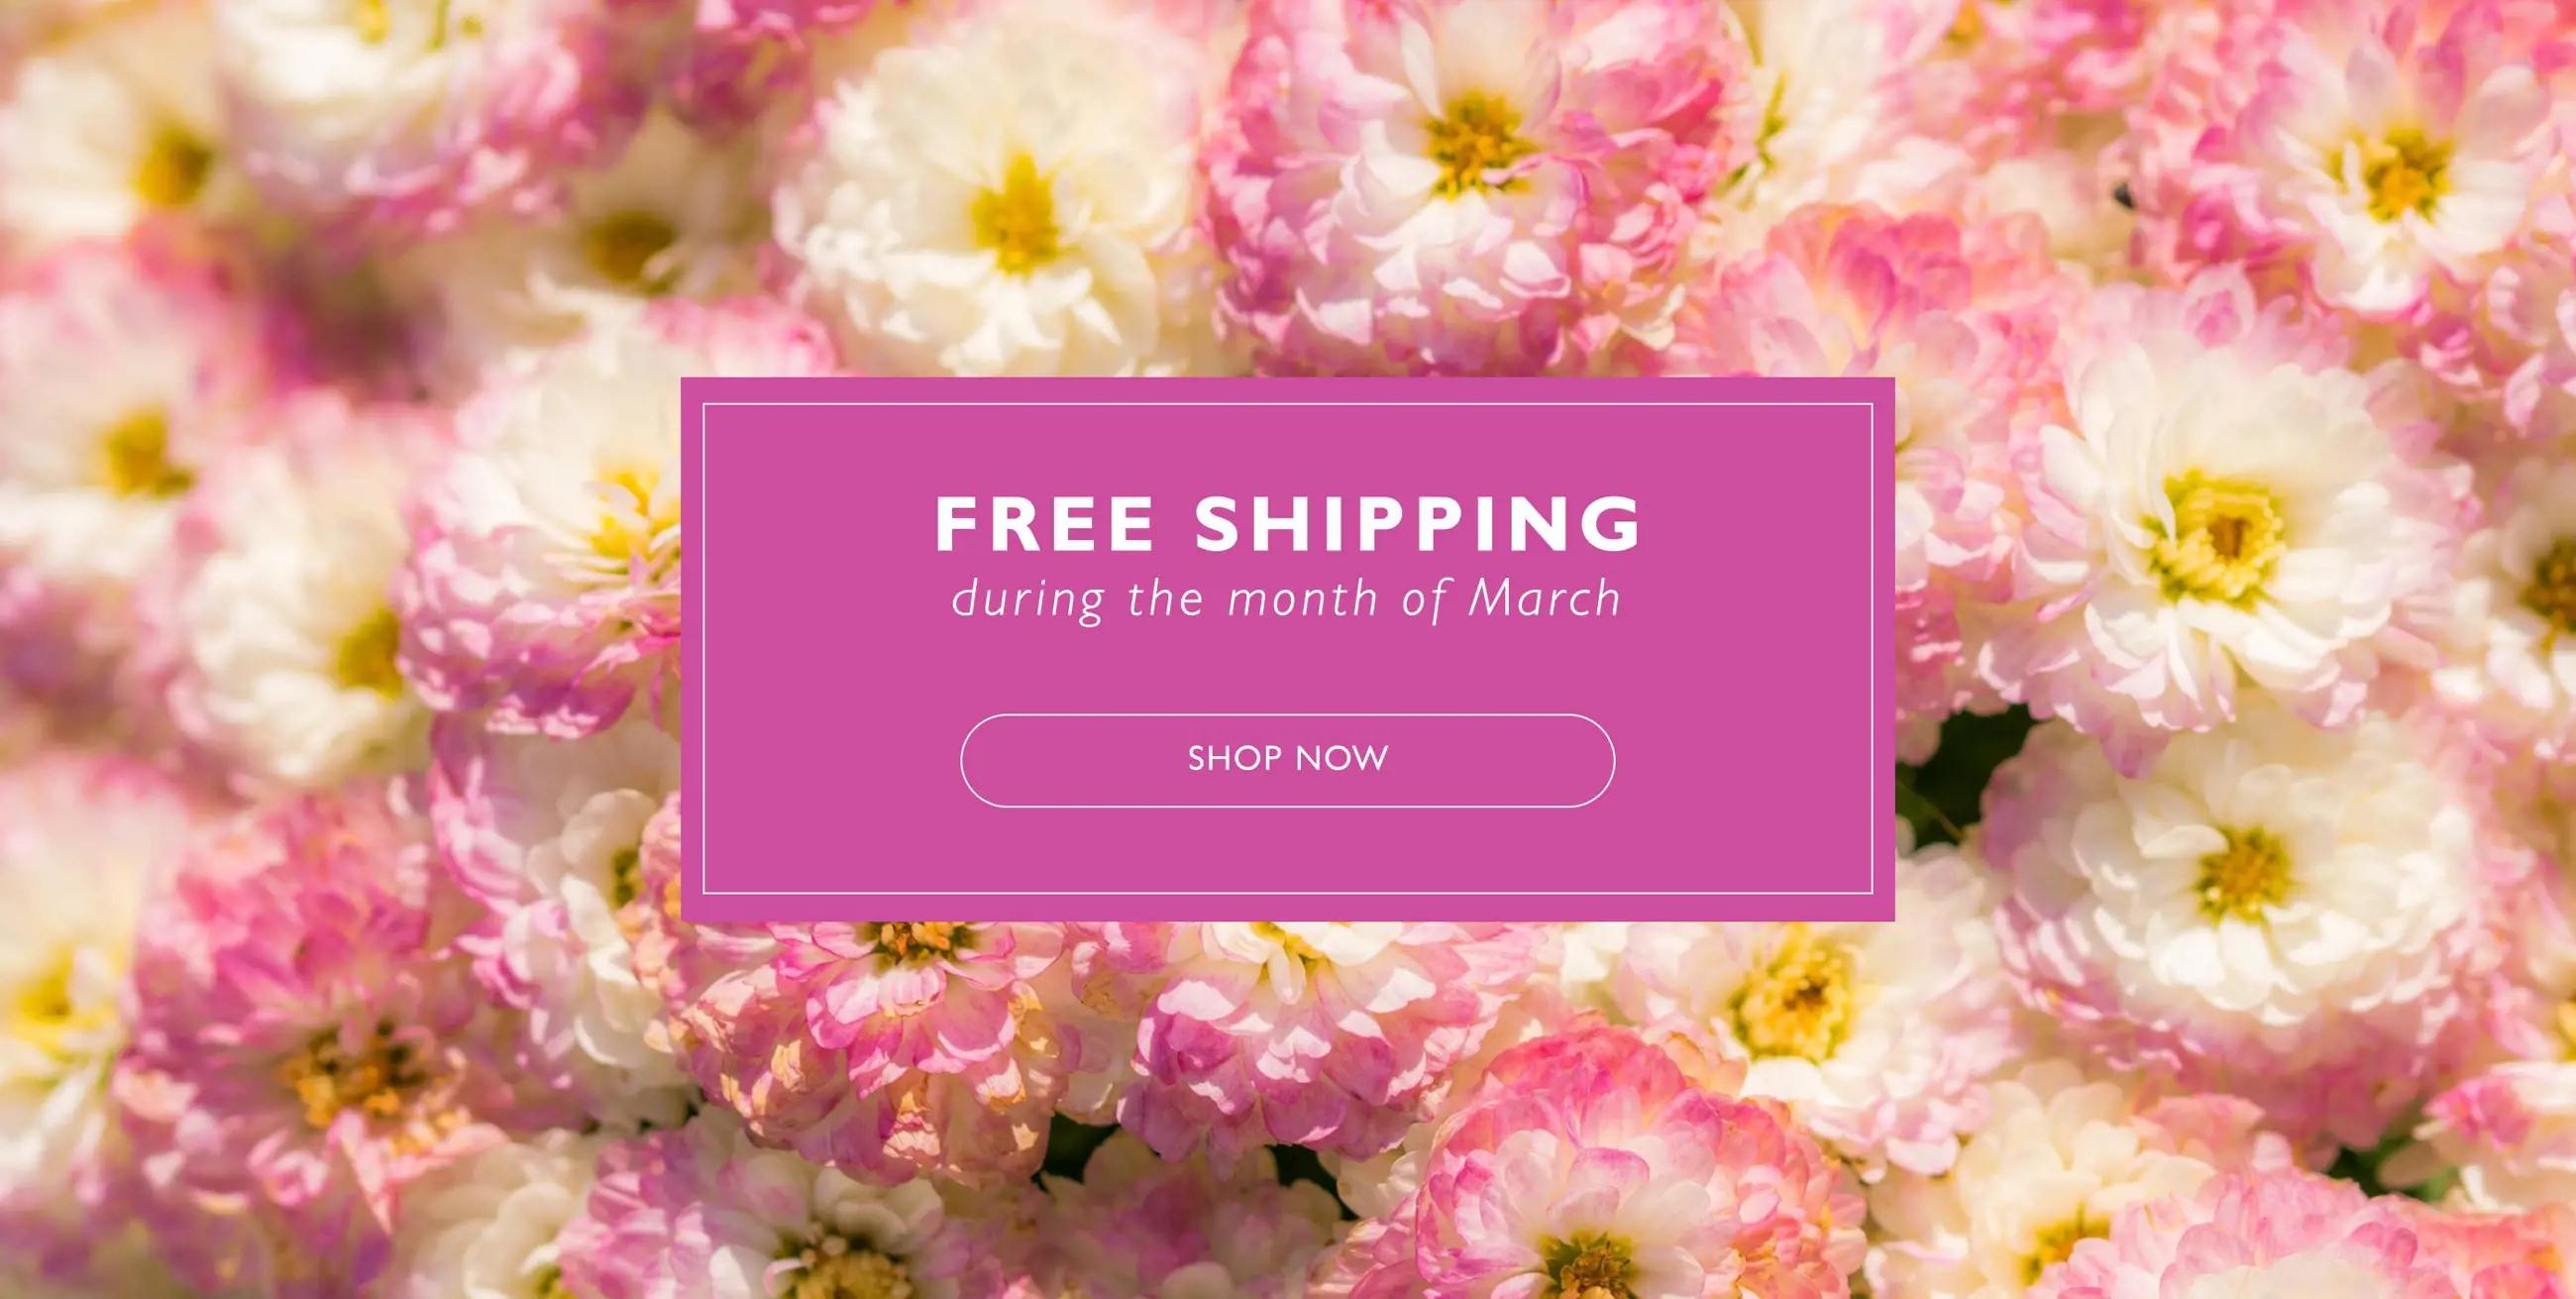 Desktop banner promoting free shipping during the month of march